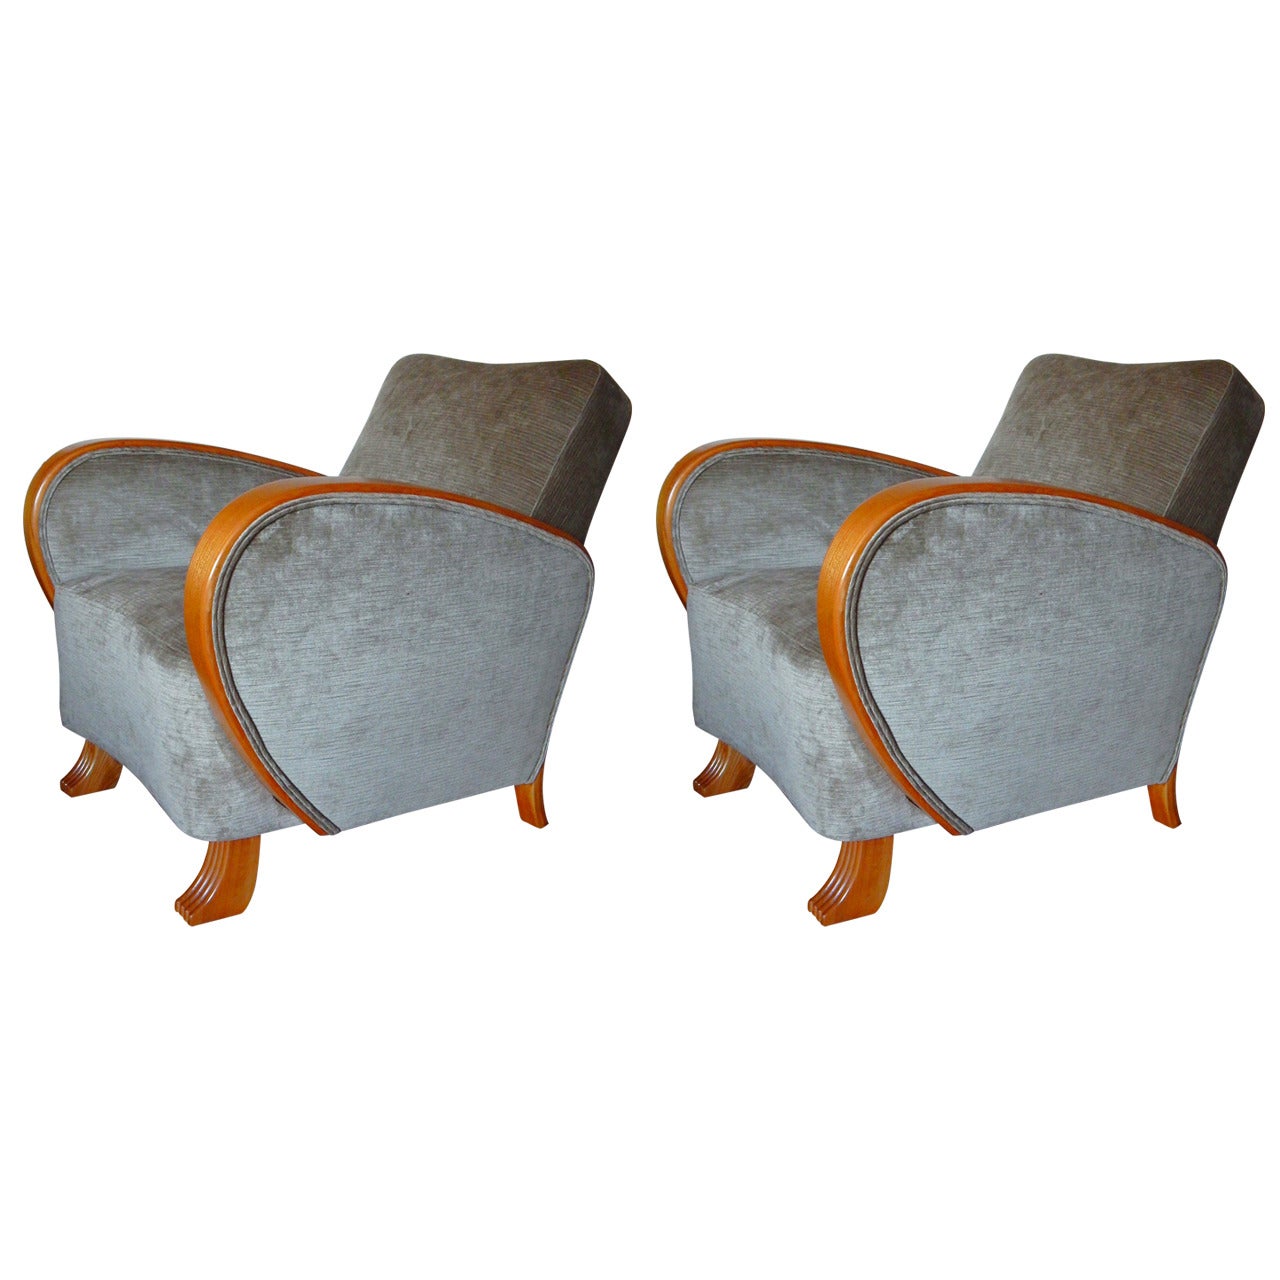 Pair of Swedish Art Deco Armchairs in Golden Elm, circa 1930 For Sale